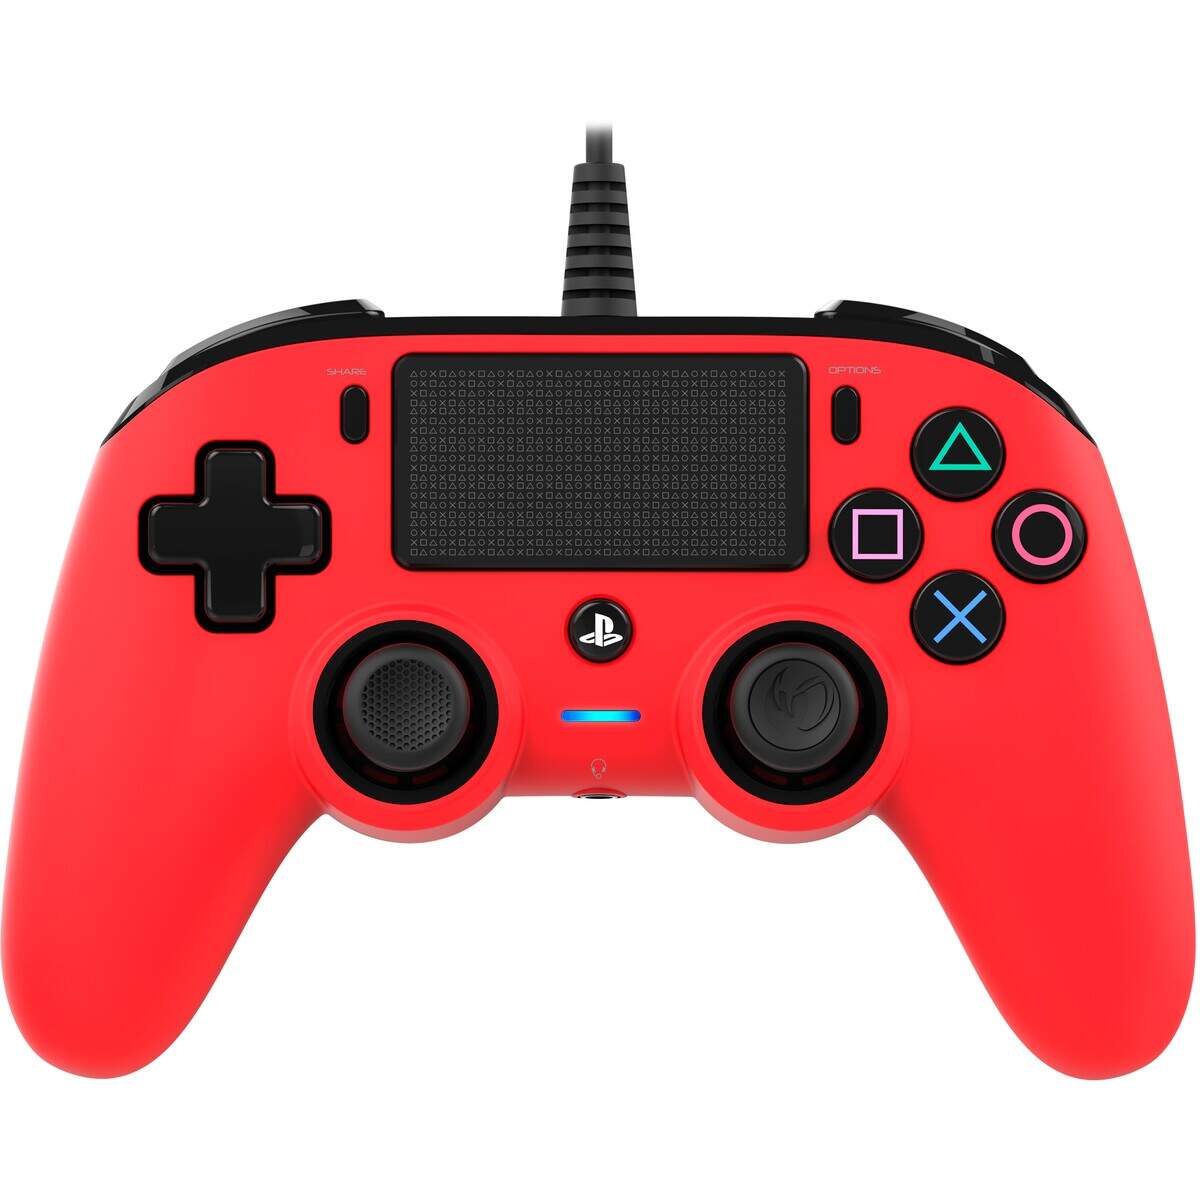 Nacon Wired Compact Controller For PlayStation 4 - Red - Level UpNaconPlayStation3499550360714